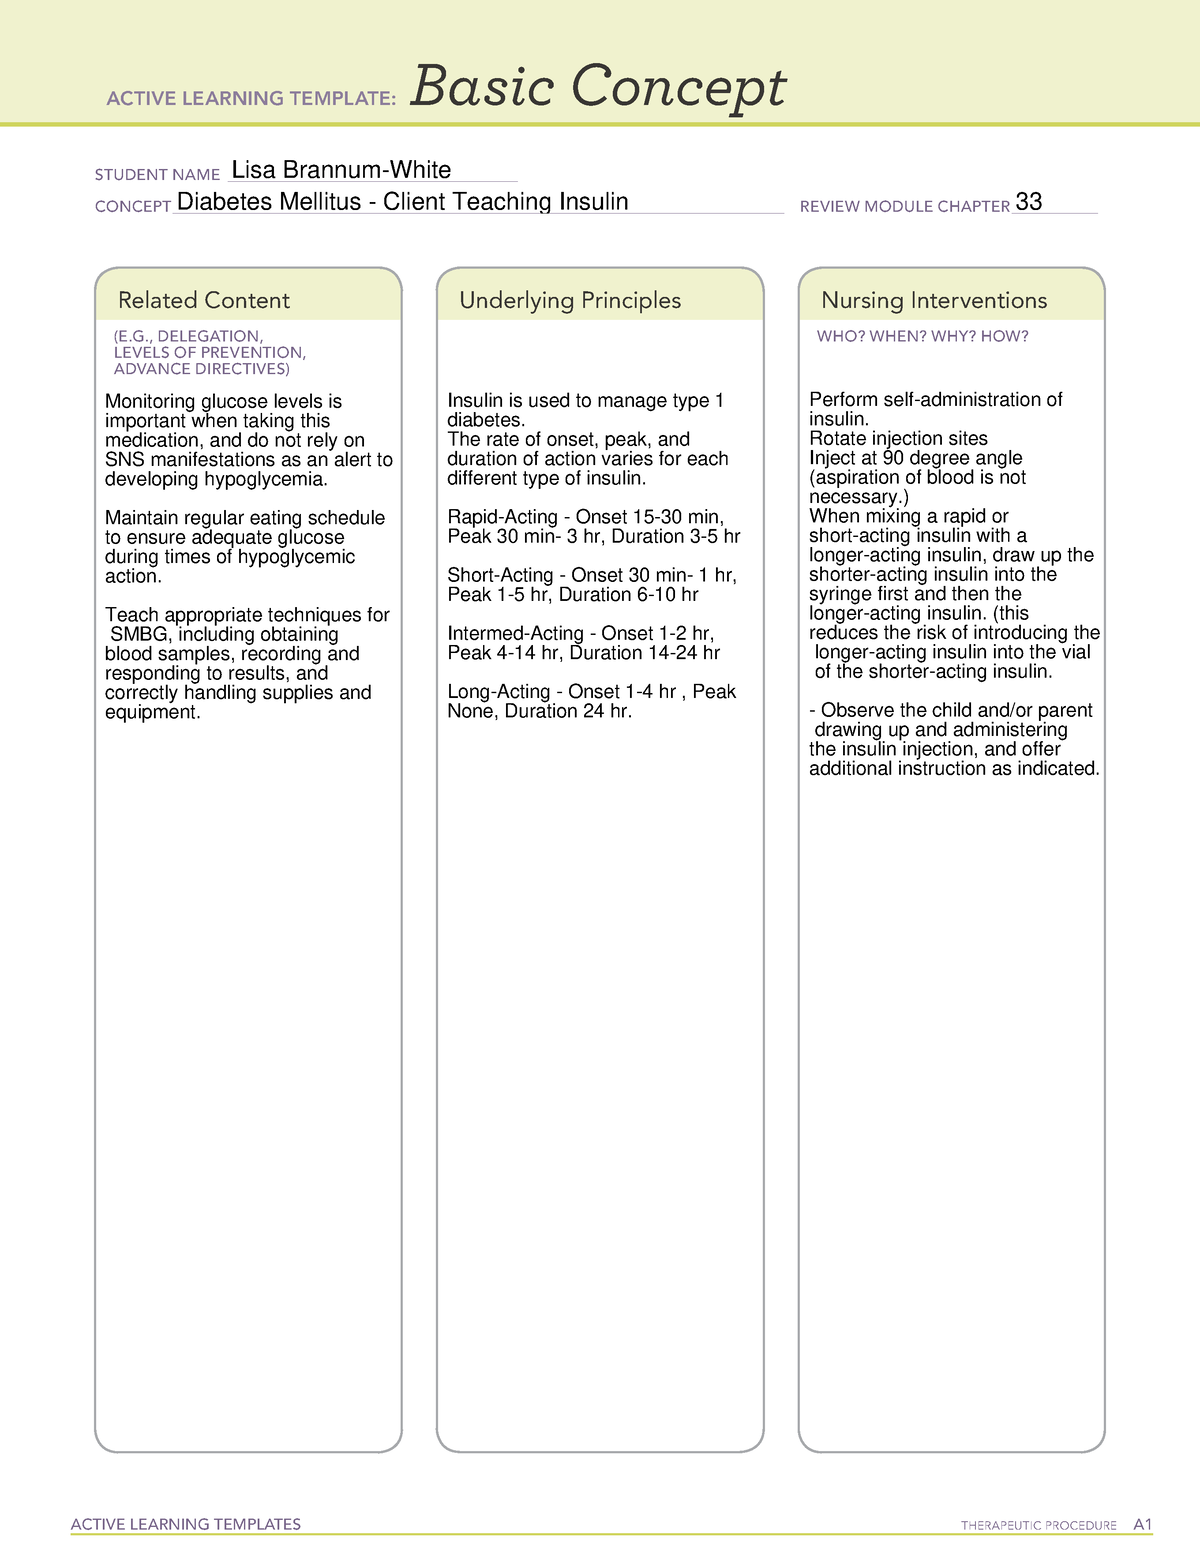 Active Learning Template Basic Concept ACTIVE LEARNING TEMPLATES THERAPEUTIC PROCEDURE A Basic